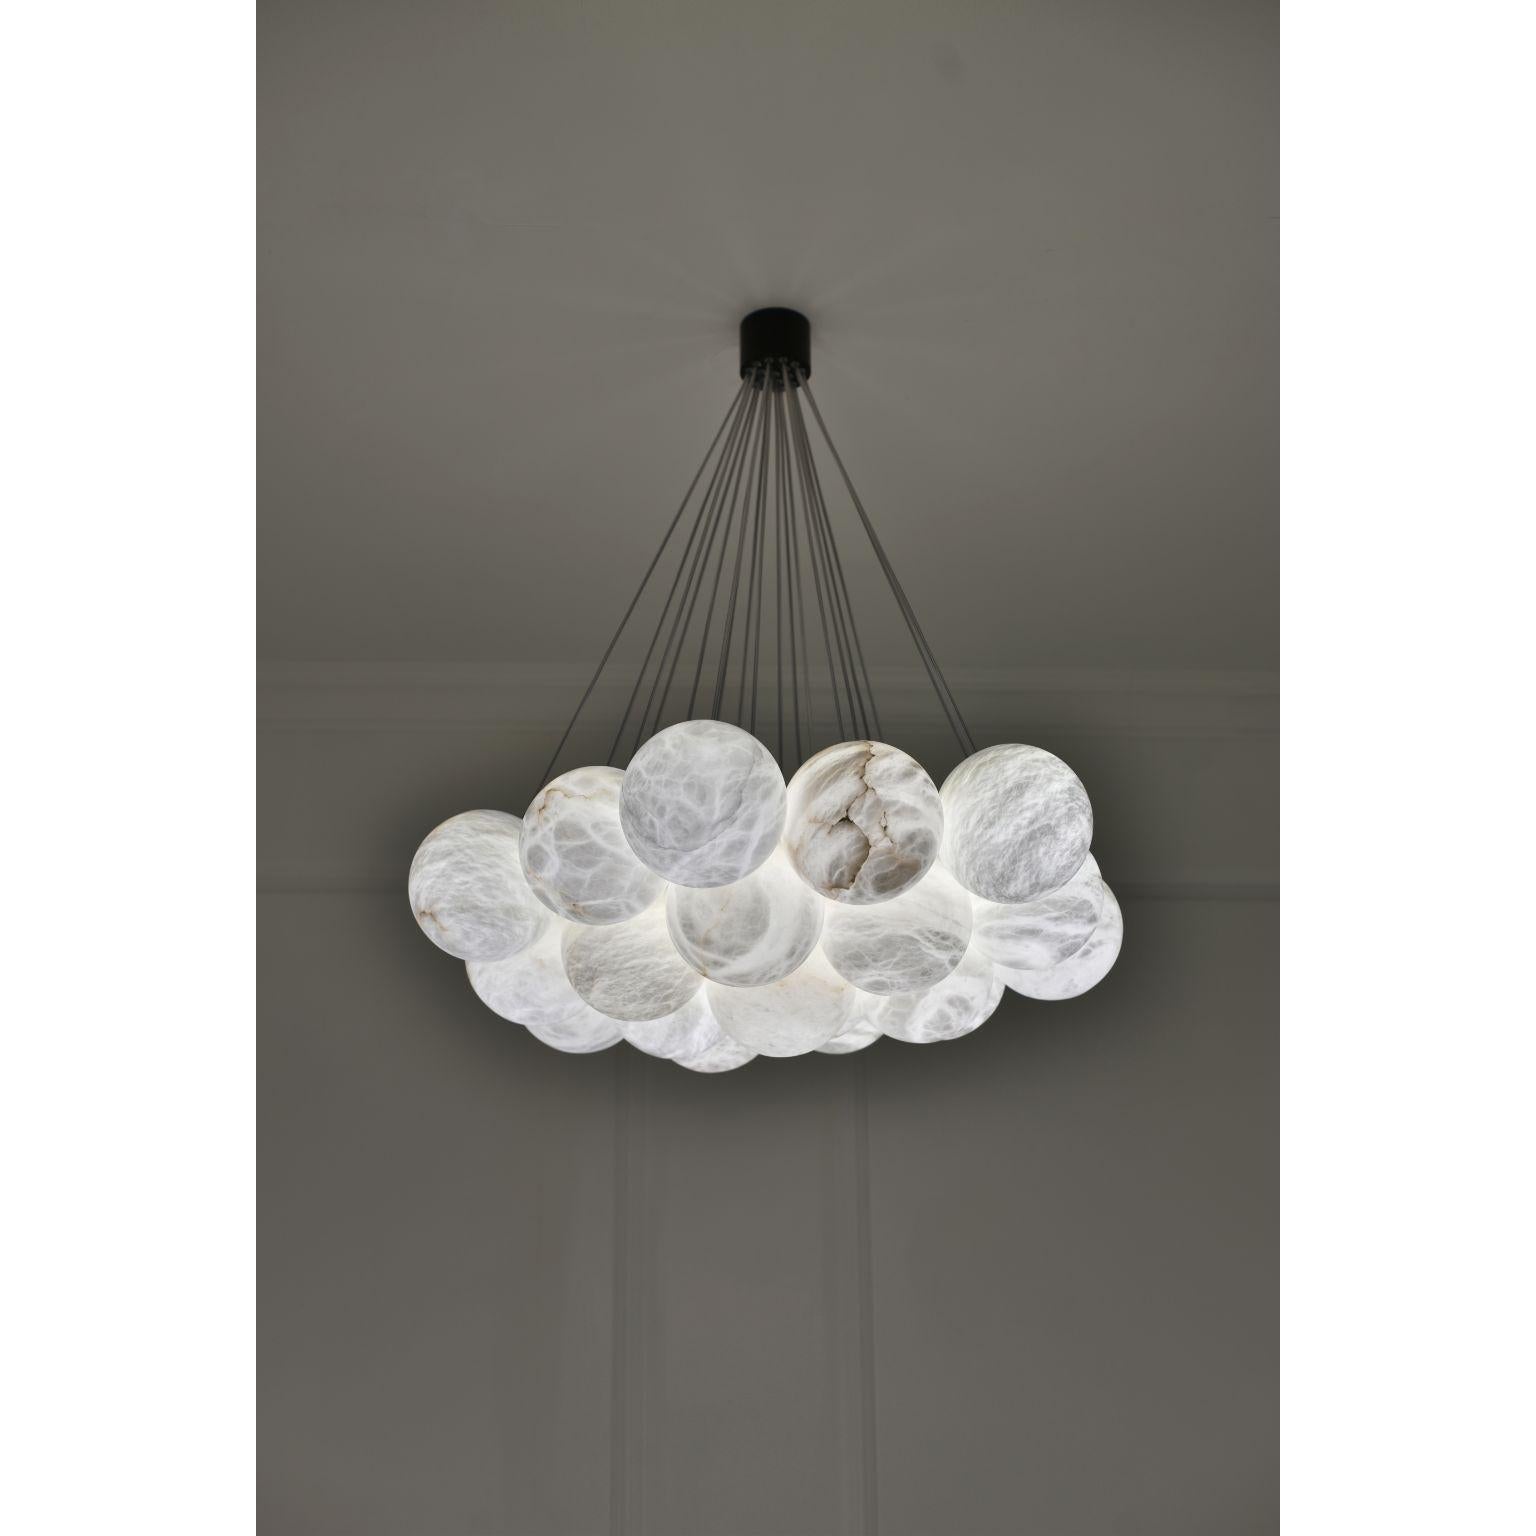 Bolky chandelier by Atelier Alain Ellouz
Atelier Alain Ellouz 
Dimensions: Ø 29.5 in x h. m in 23.6 in - max.47.2 in
Materials: 19 Alabaster spheres Ø5,9’’, 
Weight: 55 lb

Suspension system: Stainless steel wire rope + transparent electrical cable
